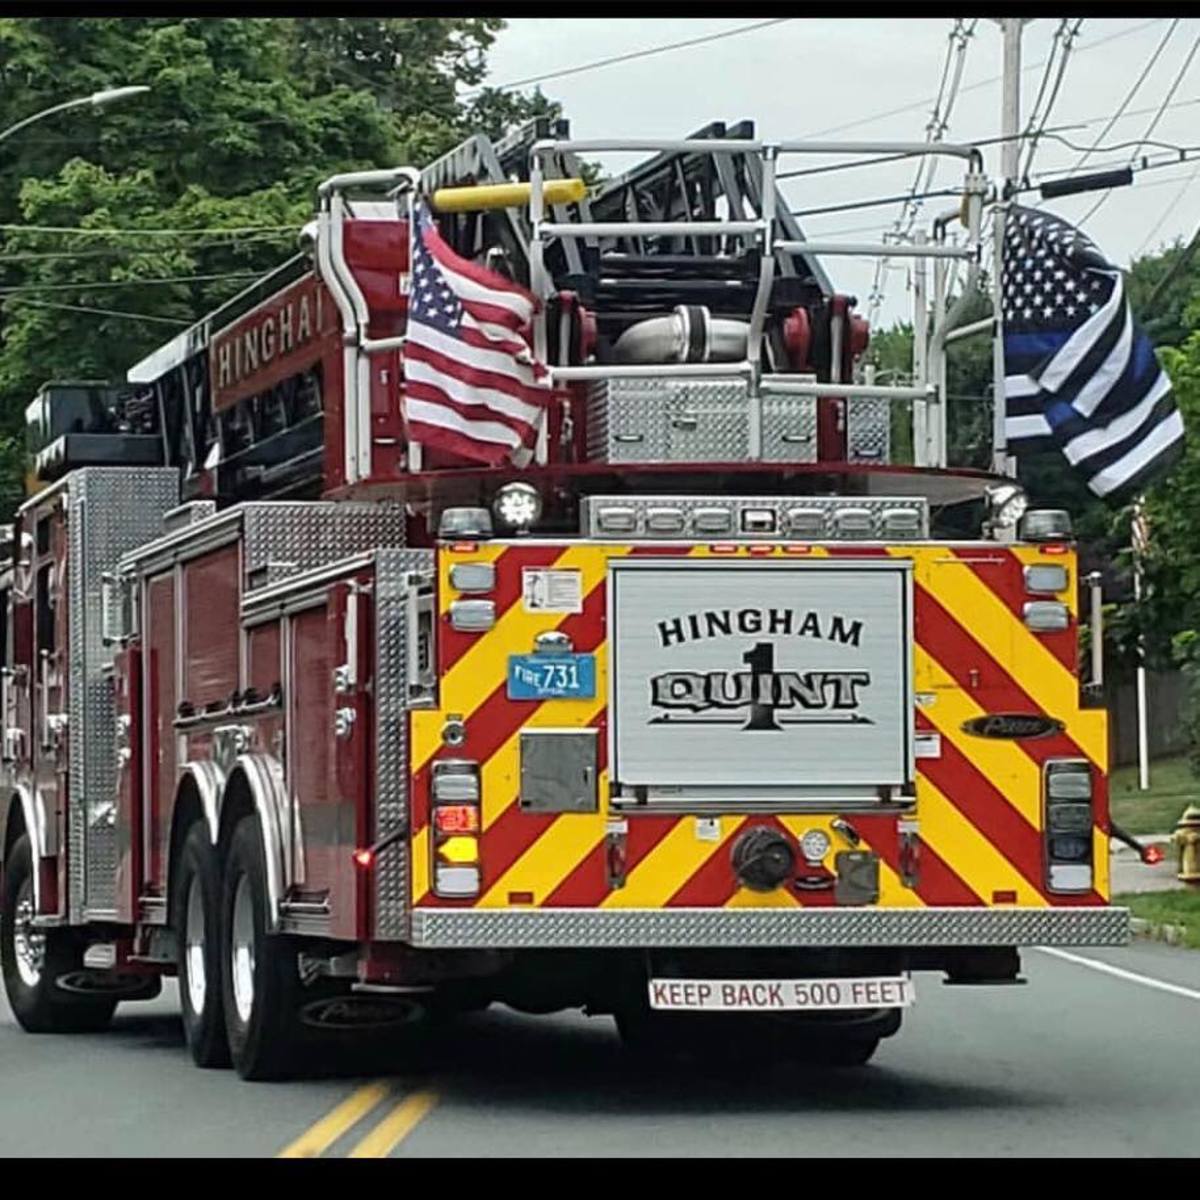 Photo Credit: Facebook/Hingham Firefighters Local 2398